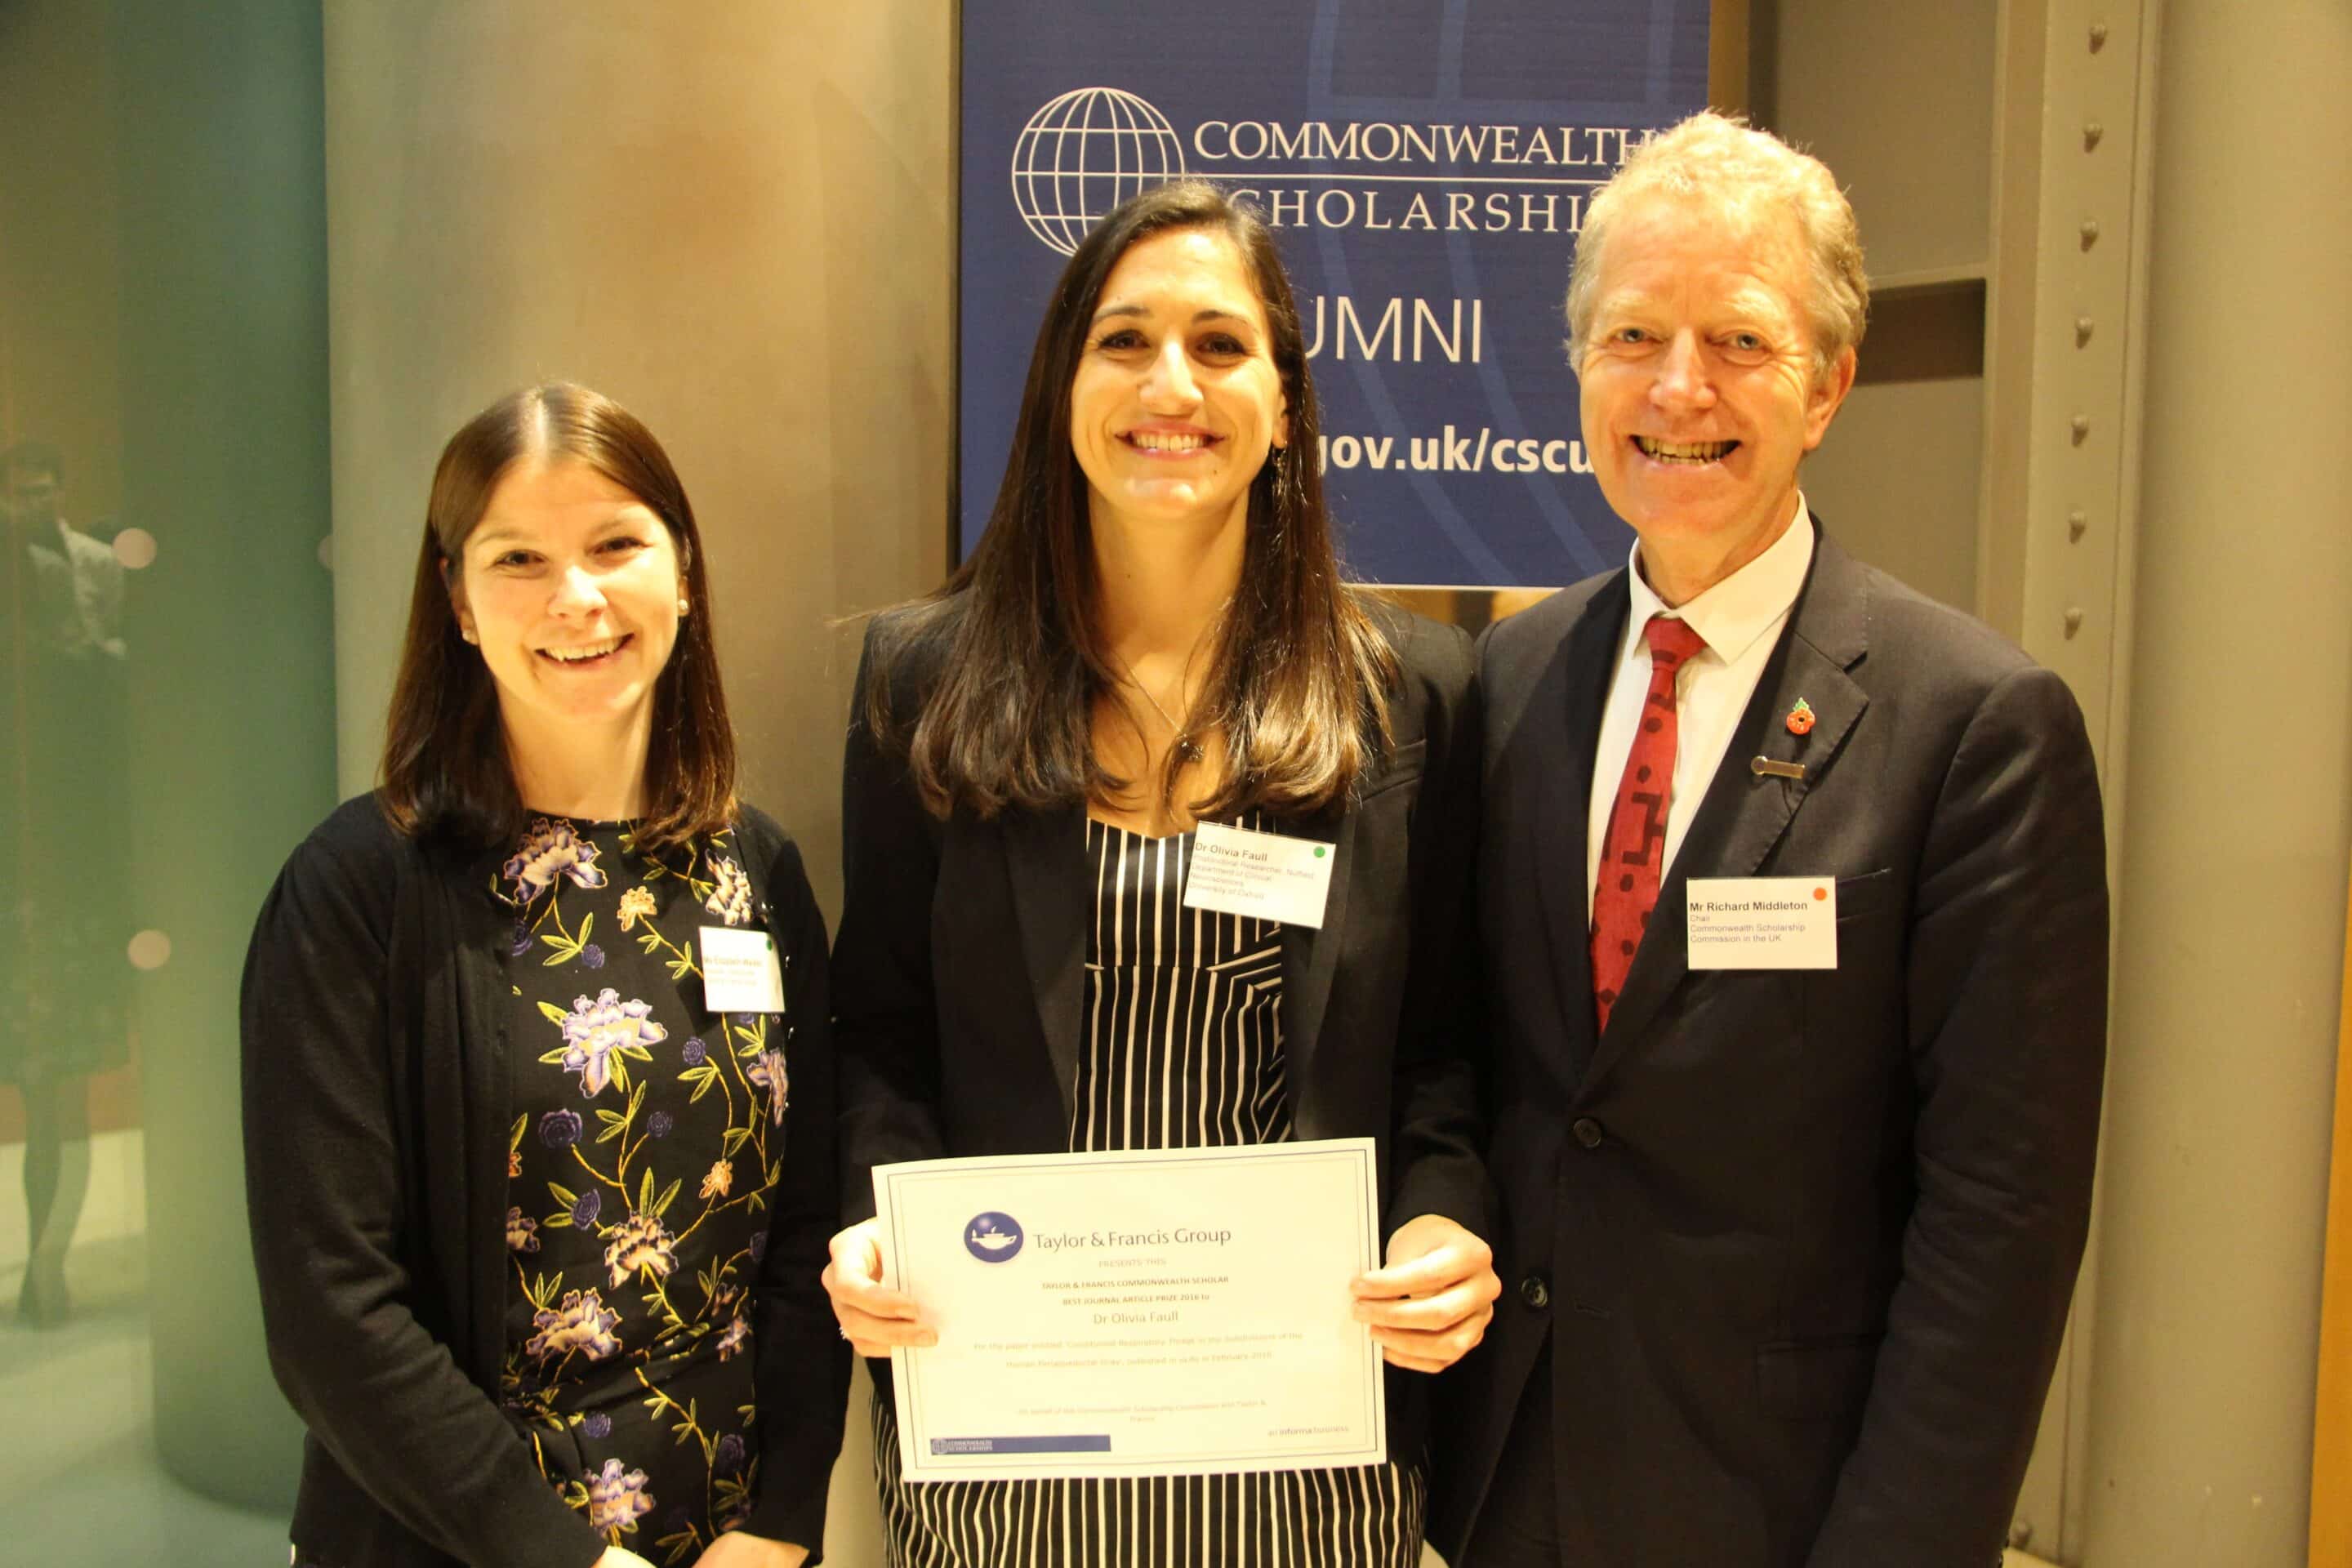 2016 Taylor and Francis Commonwealth Scholar Best Journal Article Winner Dr Olivia Faull with Mr Richard Middleton, Chair of the Commonwealth Scholarship Commission in the UK and Elizabeth Walker from Taylor and Francis Group.